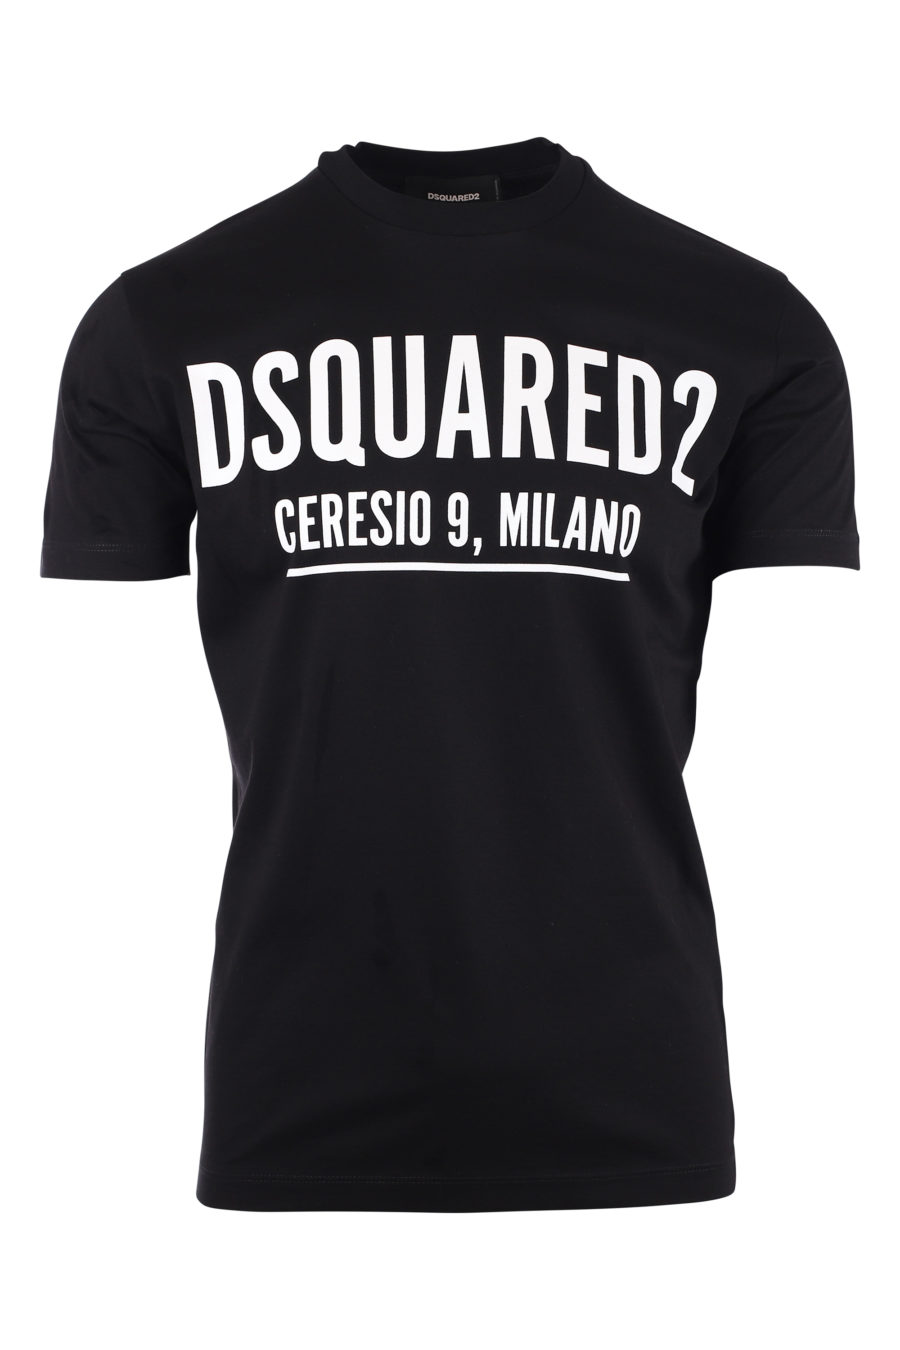 T-shirt black with logo ceresio 9 - IMG 9726